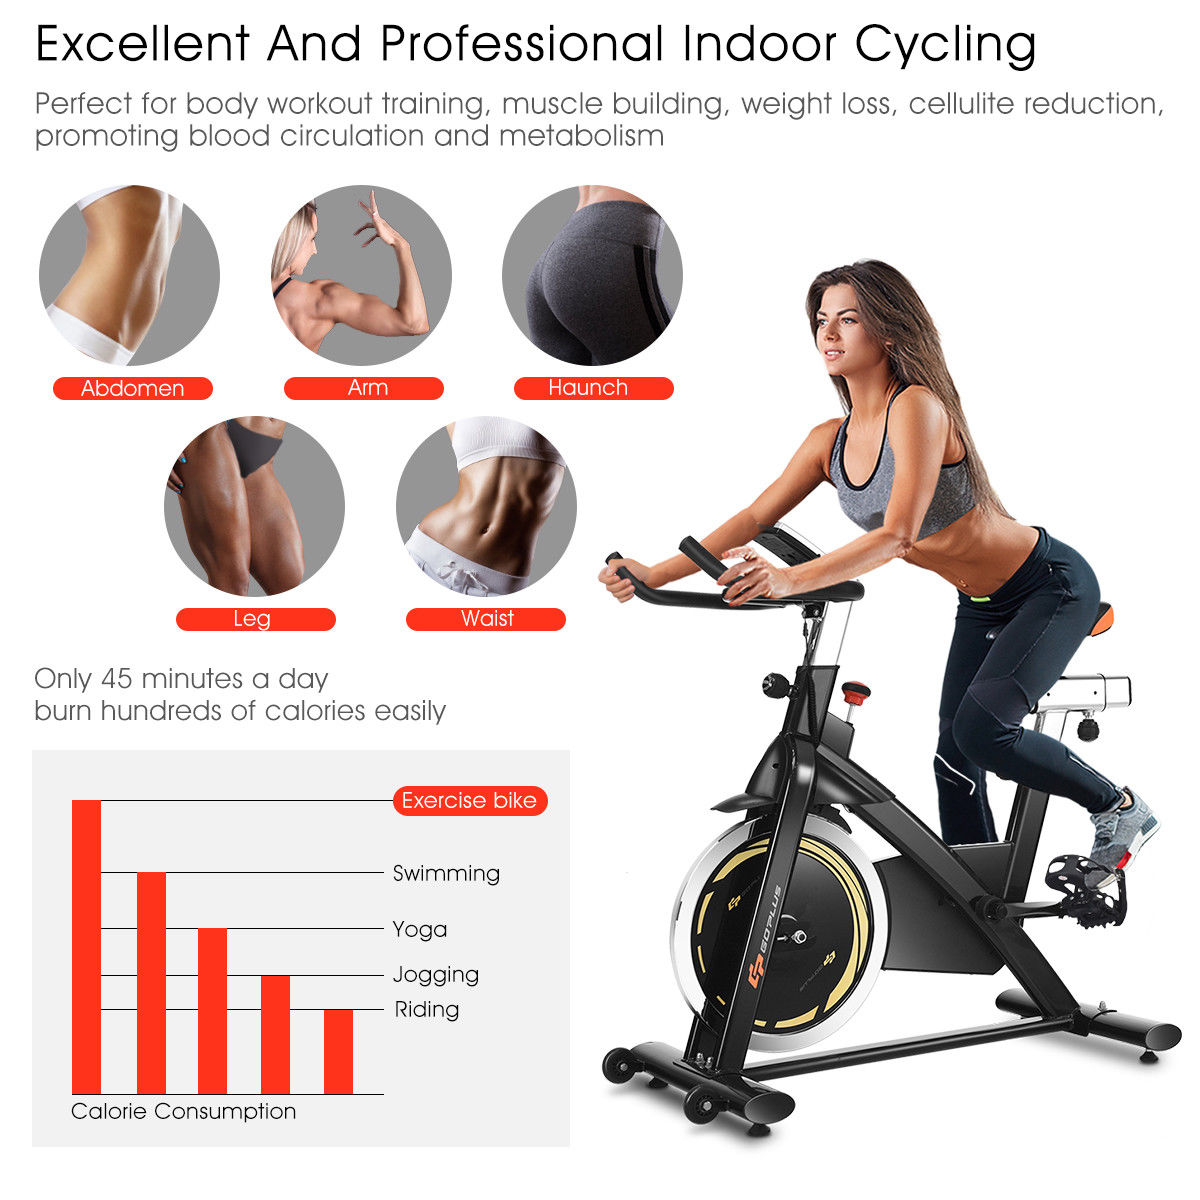 Goplus Exercise Bike Cycle Trainer Indoor Workout Cardio Fitness Bicycle Stationary - image 9 of 10